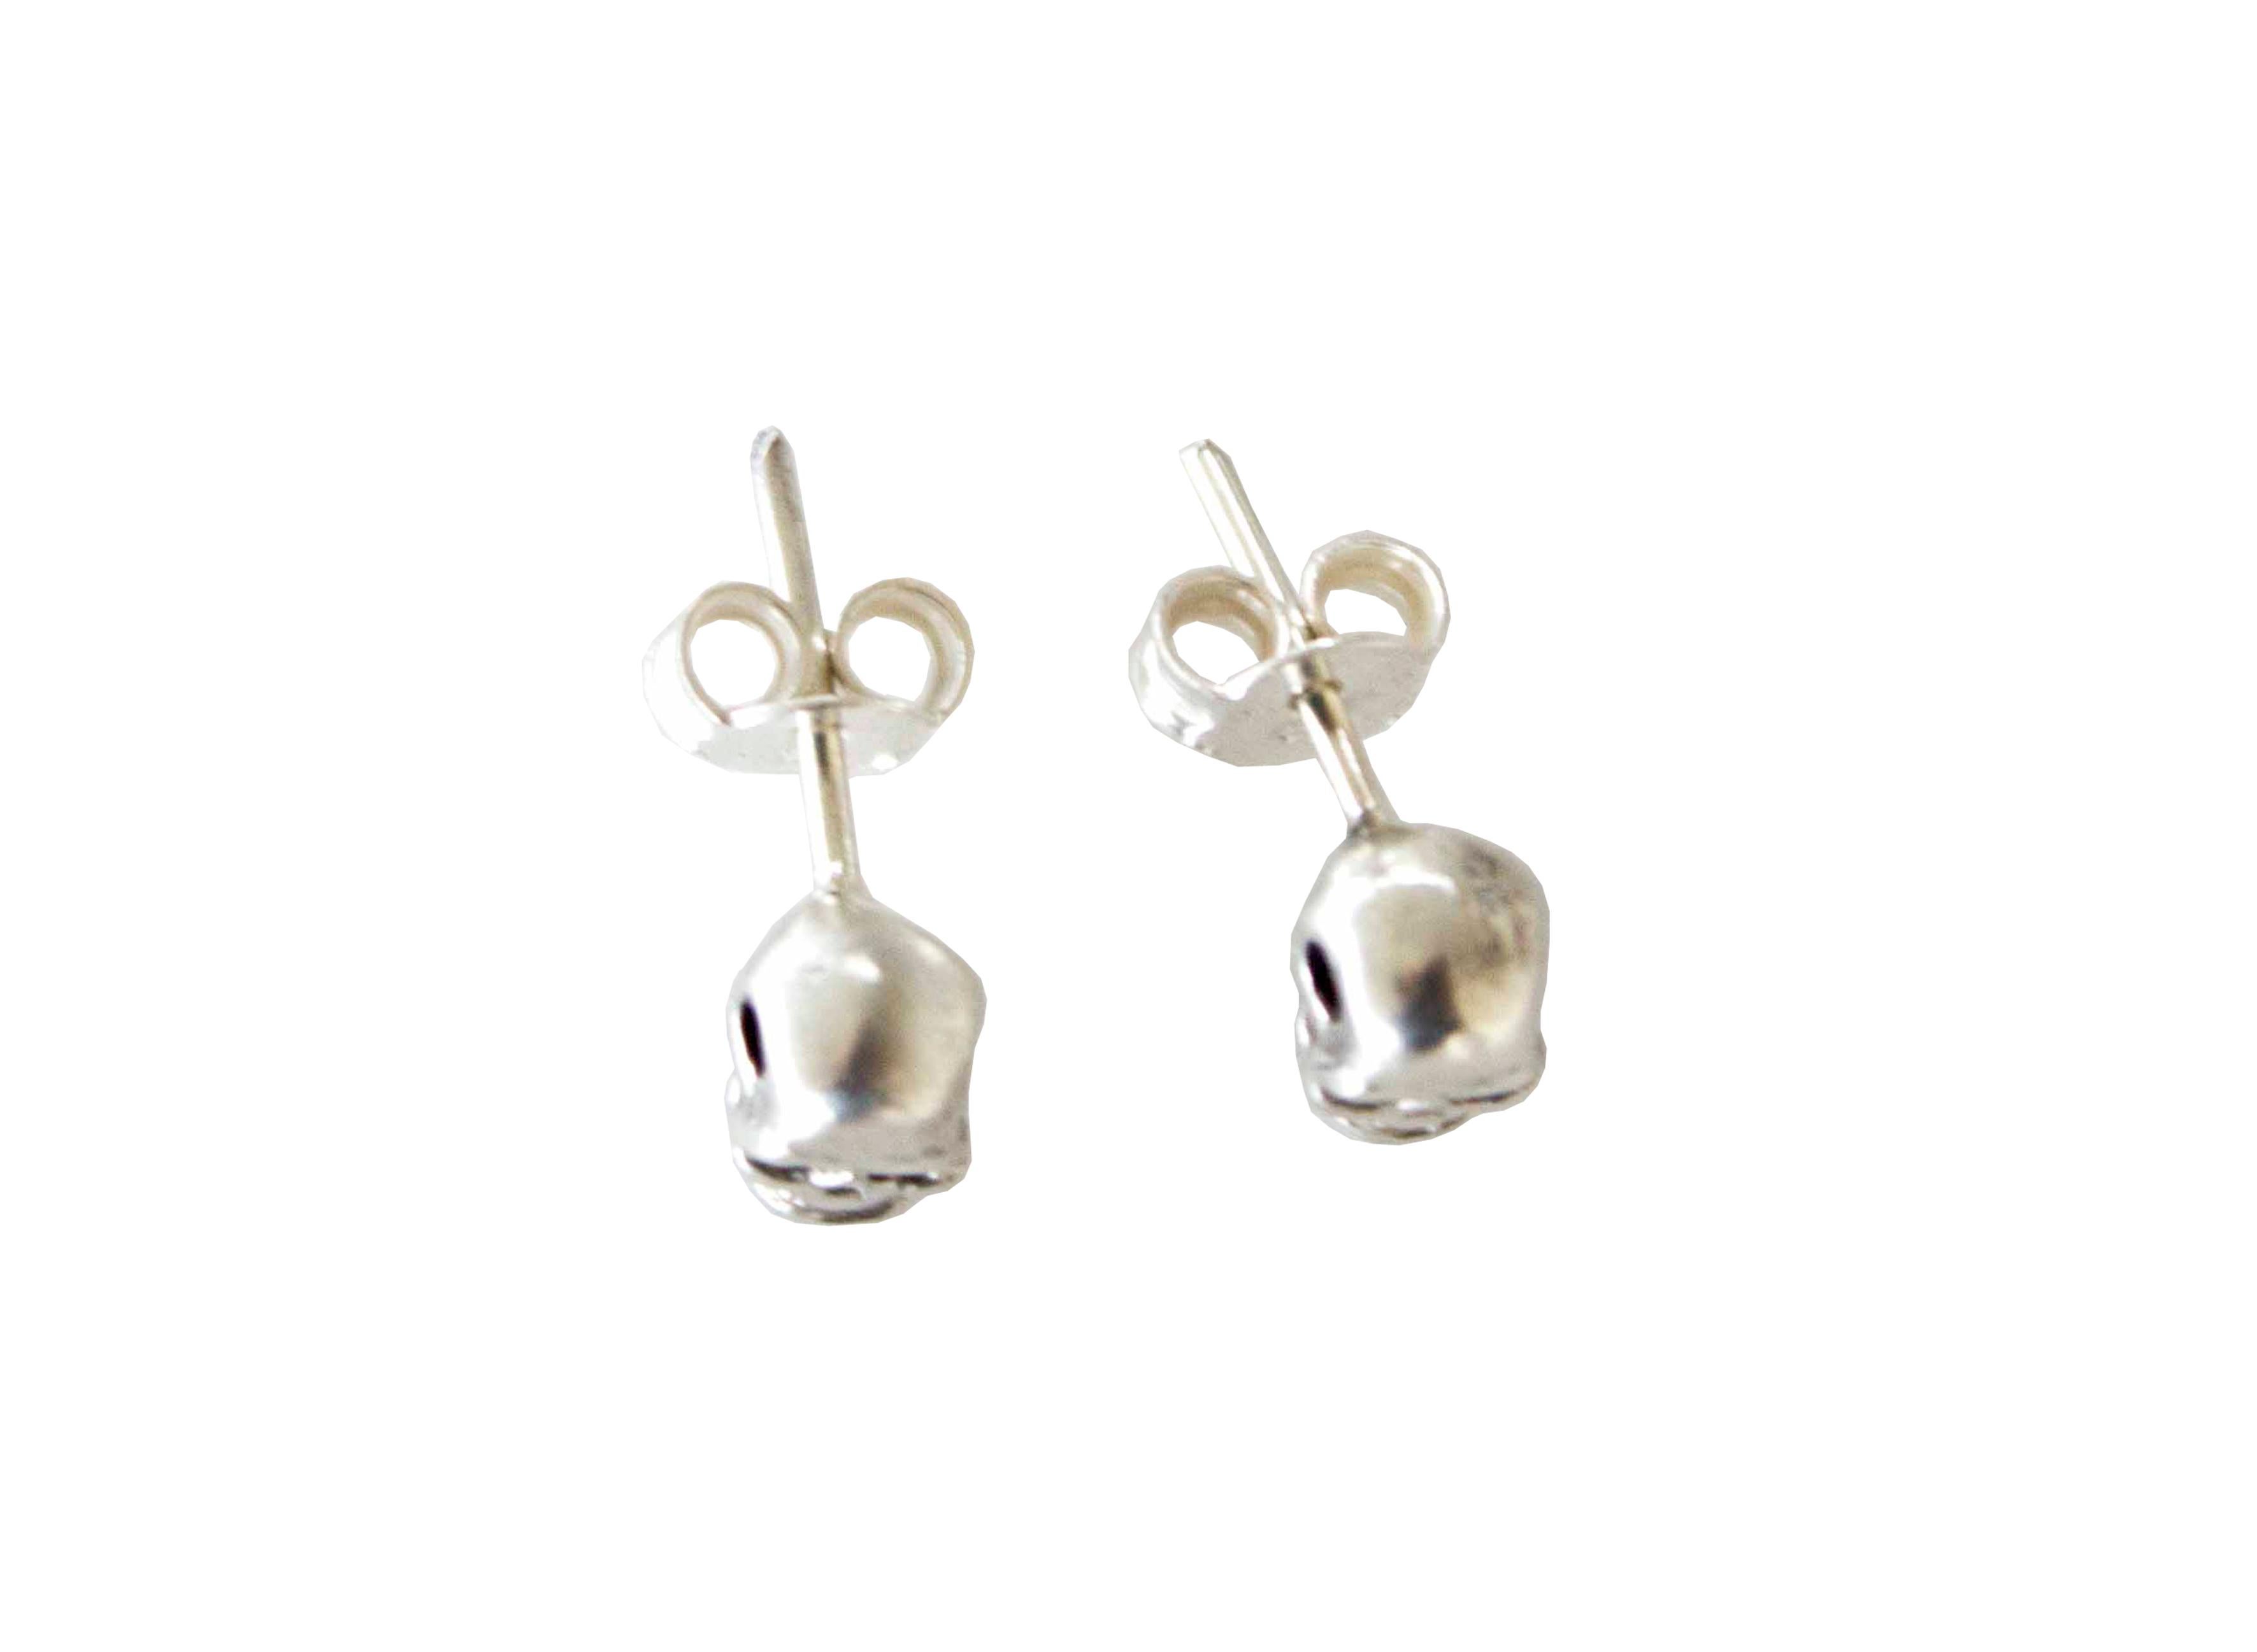 Delicate skull studs.

The earrings are made from eco sterling silver and can be worn to complete an avant-garde outfit with a touch of elegance.

Skull size 6.5mm x 4.5mm